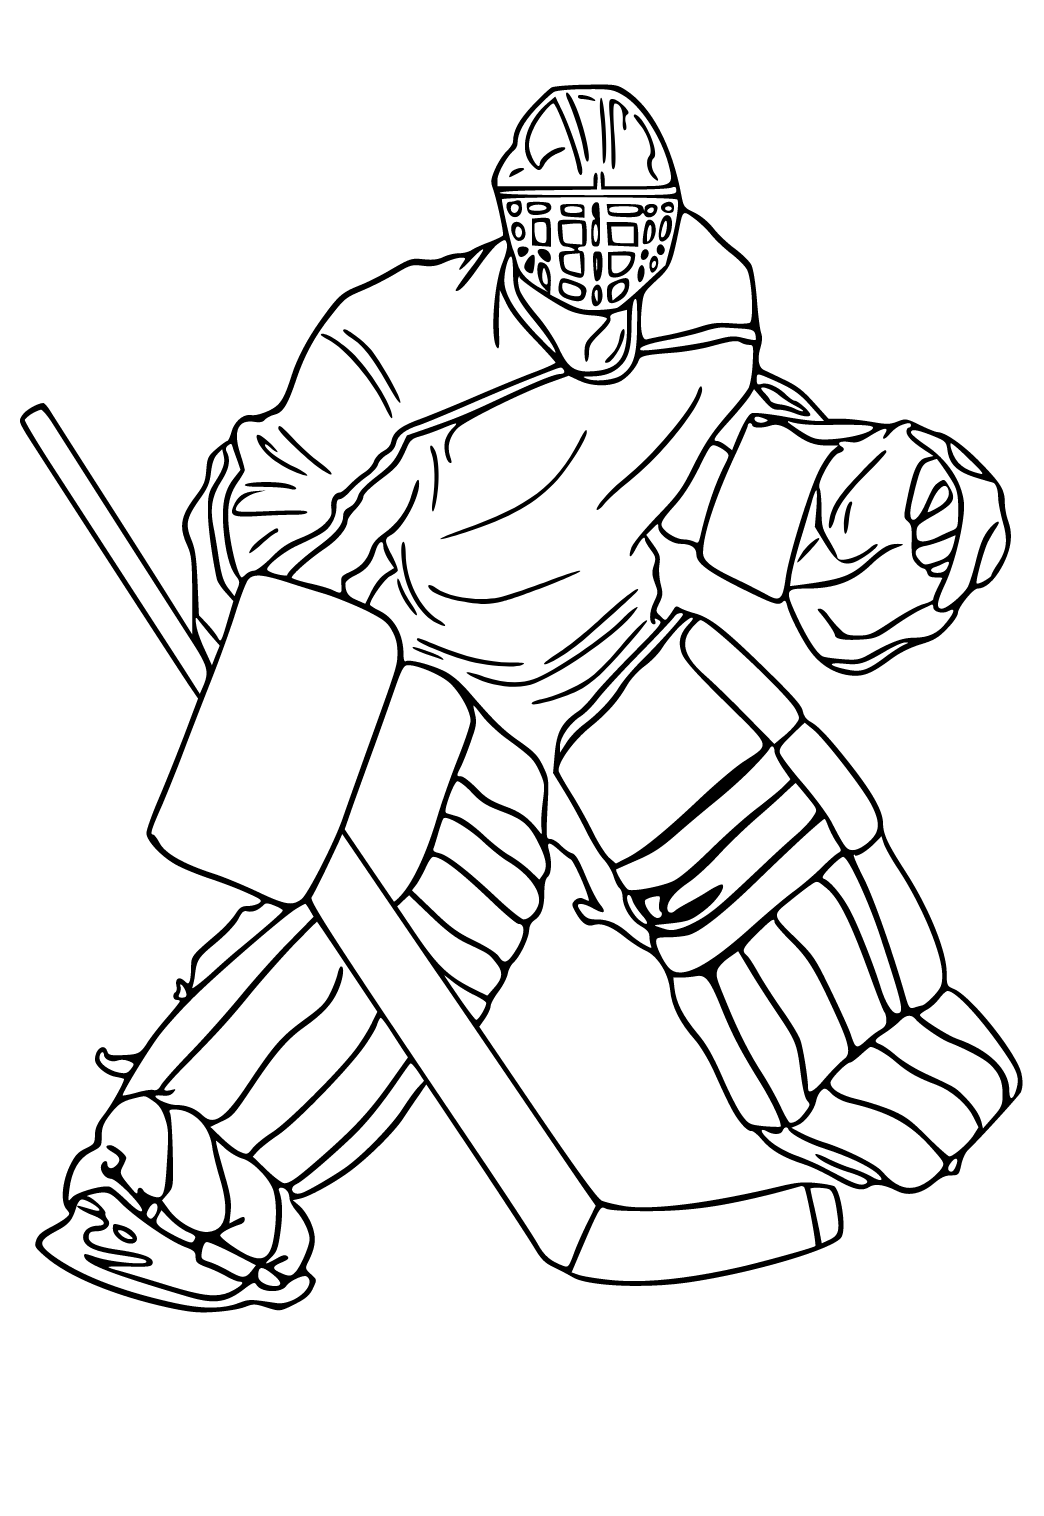 Image result for hockey goalie drawing  Sports coloring pages, Hockey  drawing, Hockey goalie